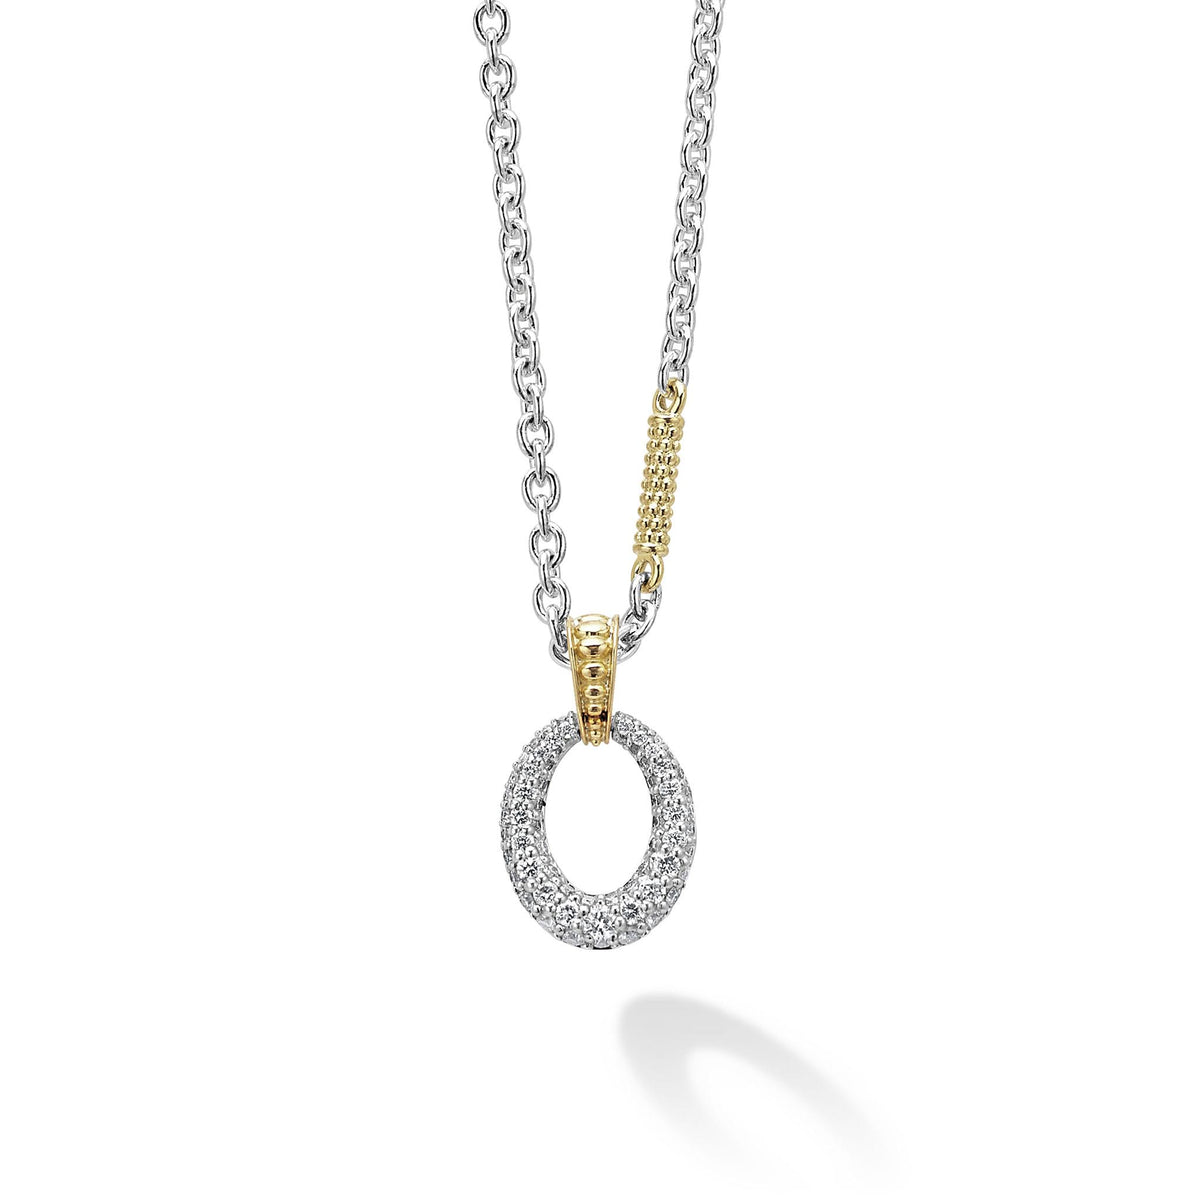 LAGOS | Jewelry | Lagos Caviar Sterling Silver And 8k Gold Necklace With Heart  Pendant | Poshmark